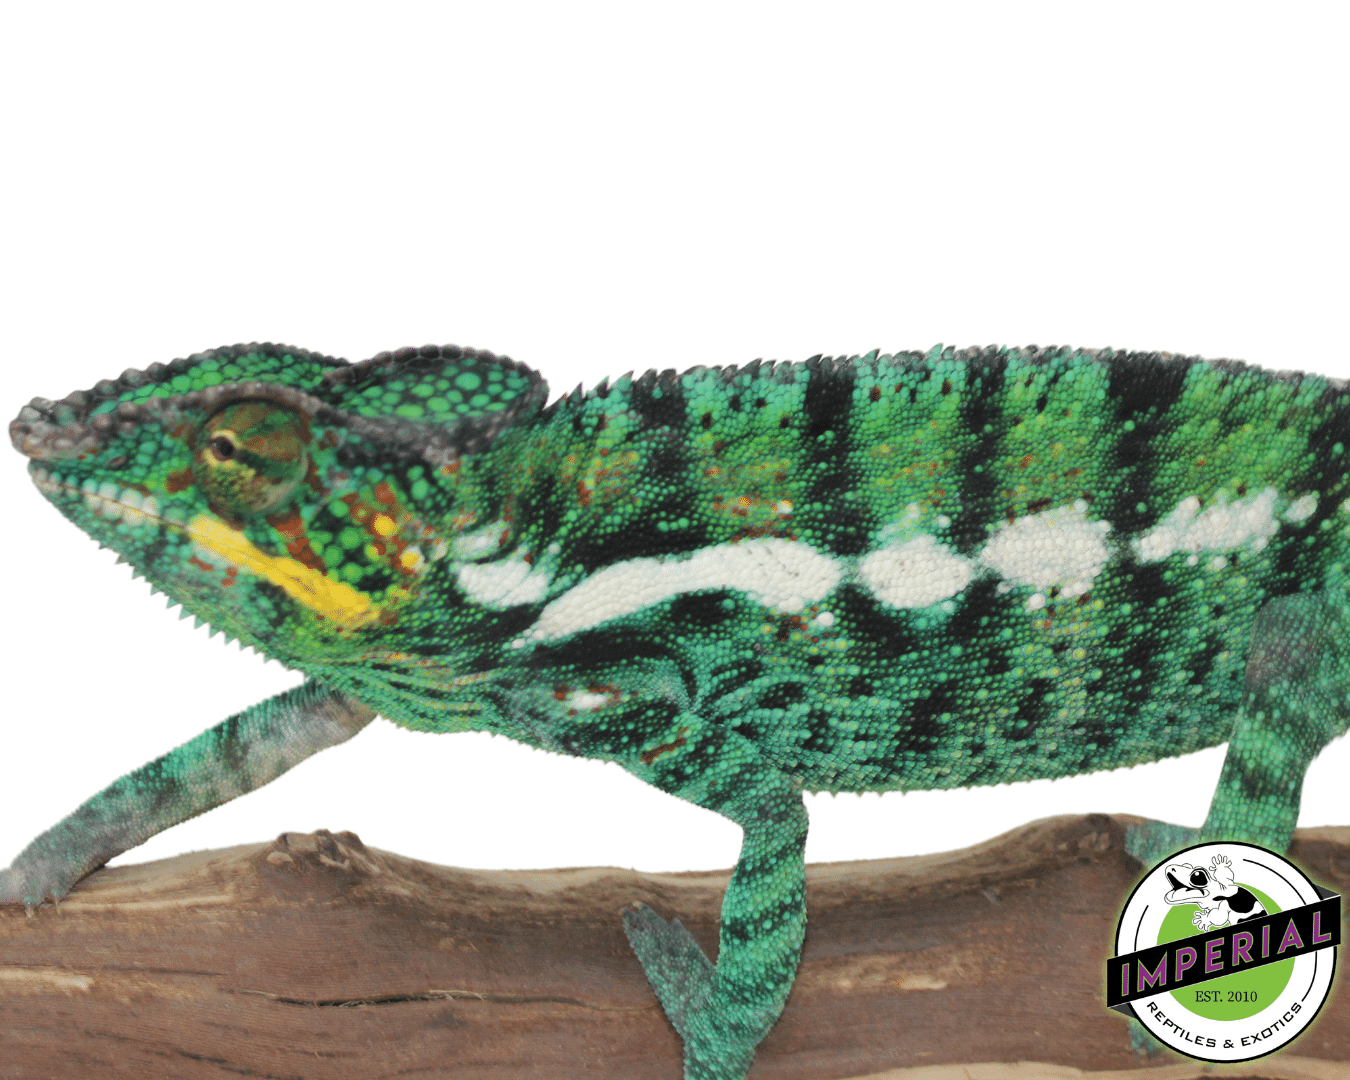 nosy be panther chameleon for sale, buy reptiles online